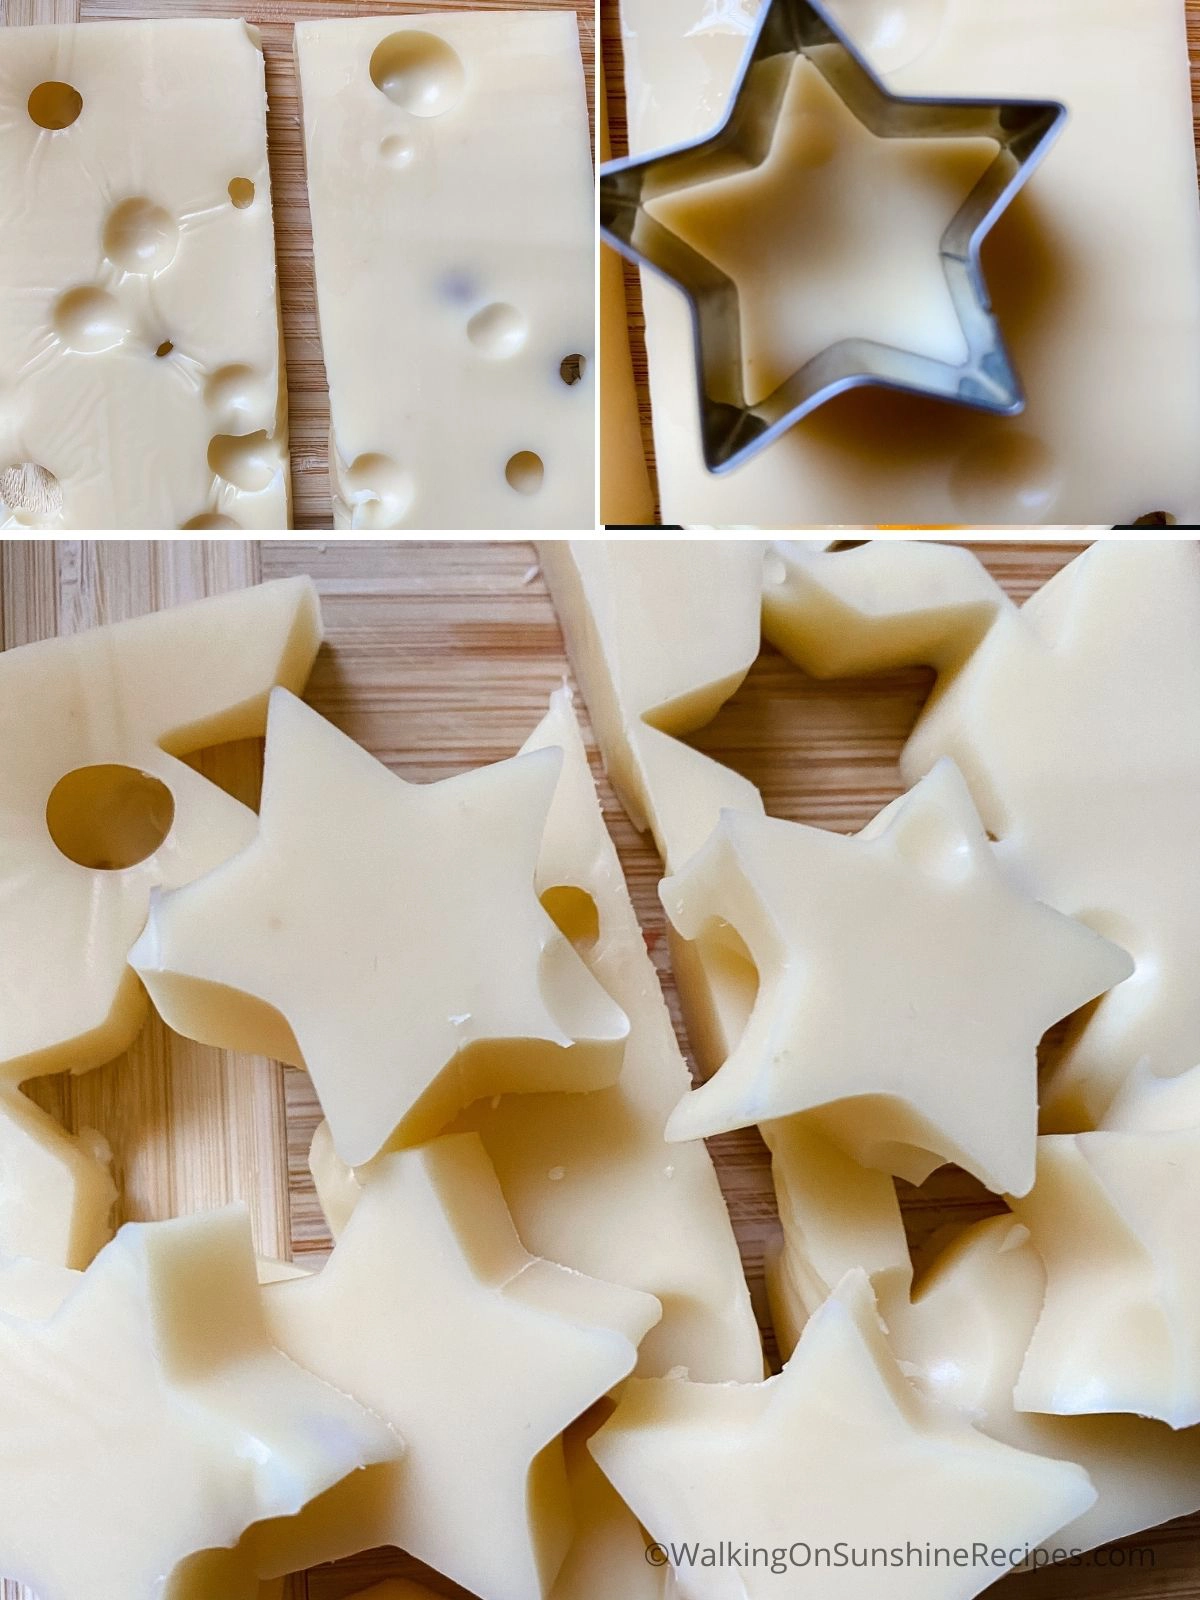 Cut star shapes in Swiss cheese.